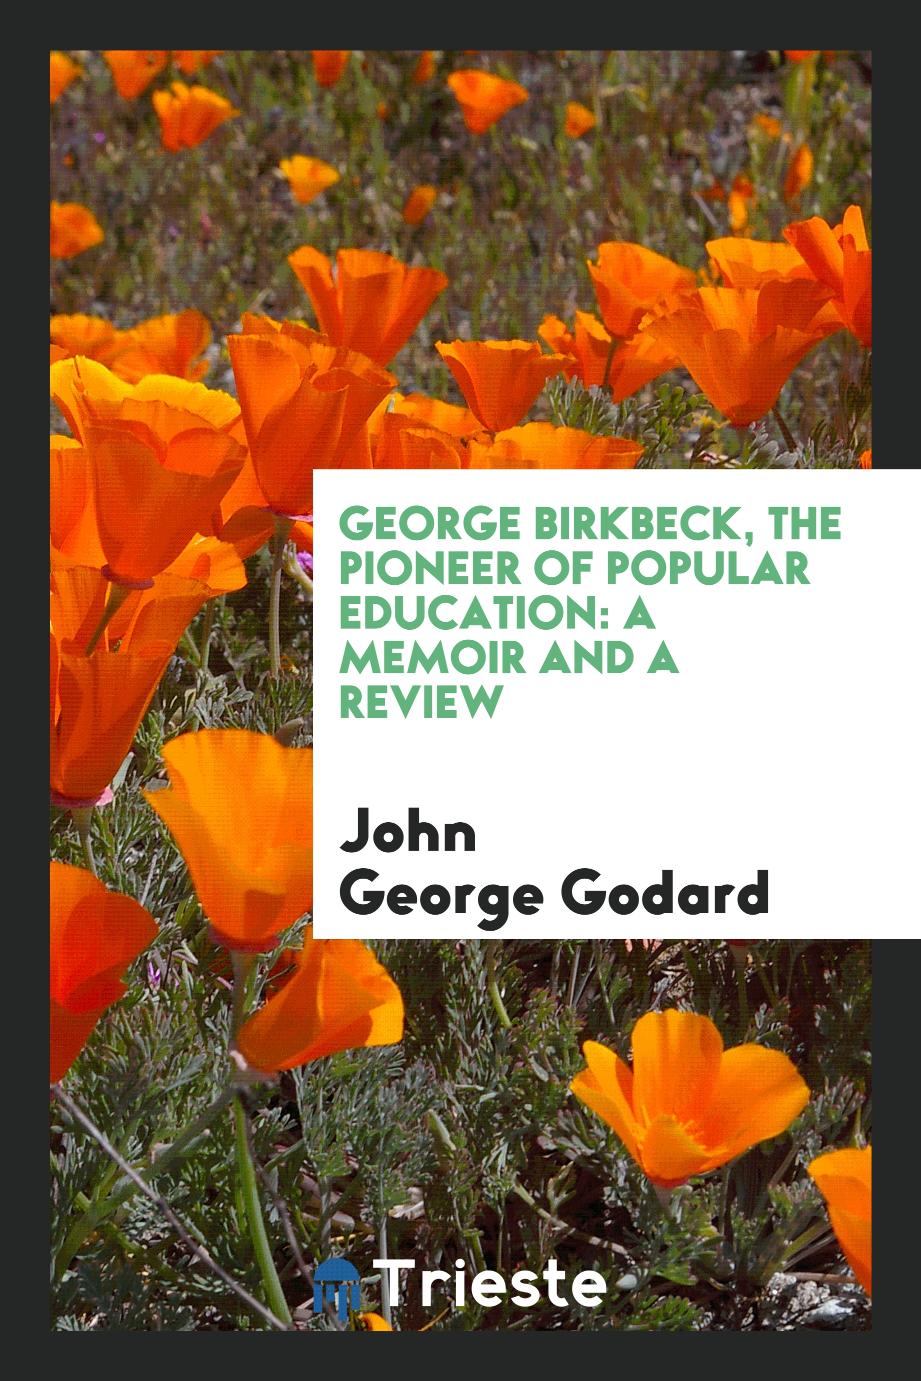 George Birkbeck, the pioneer of popular education: a memoir and a review